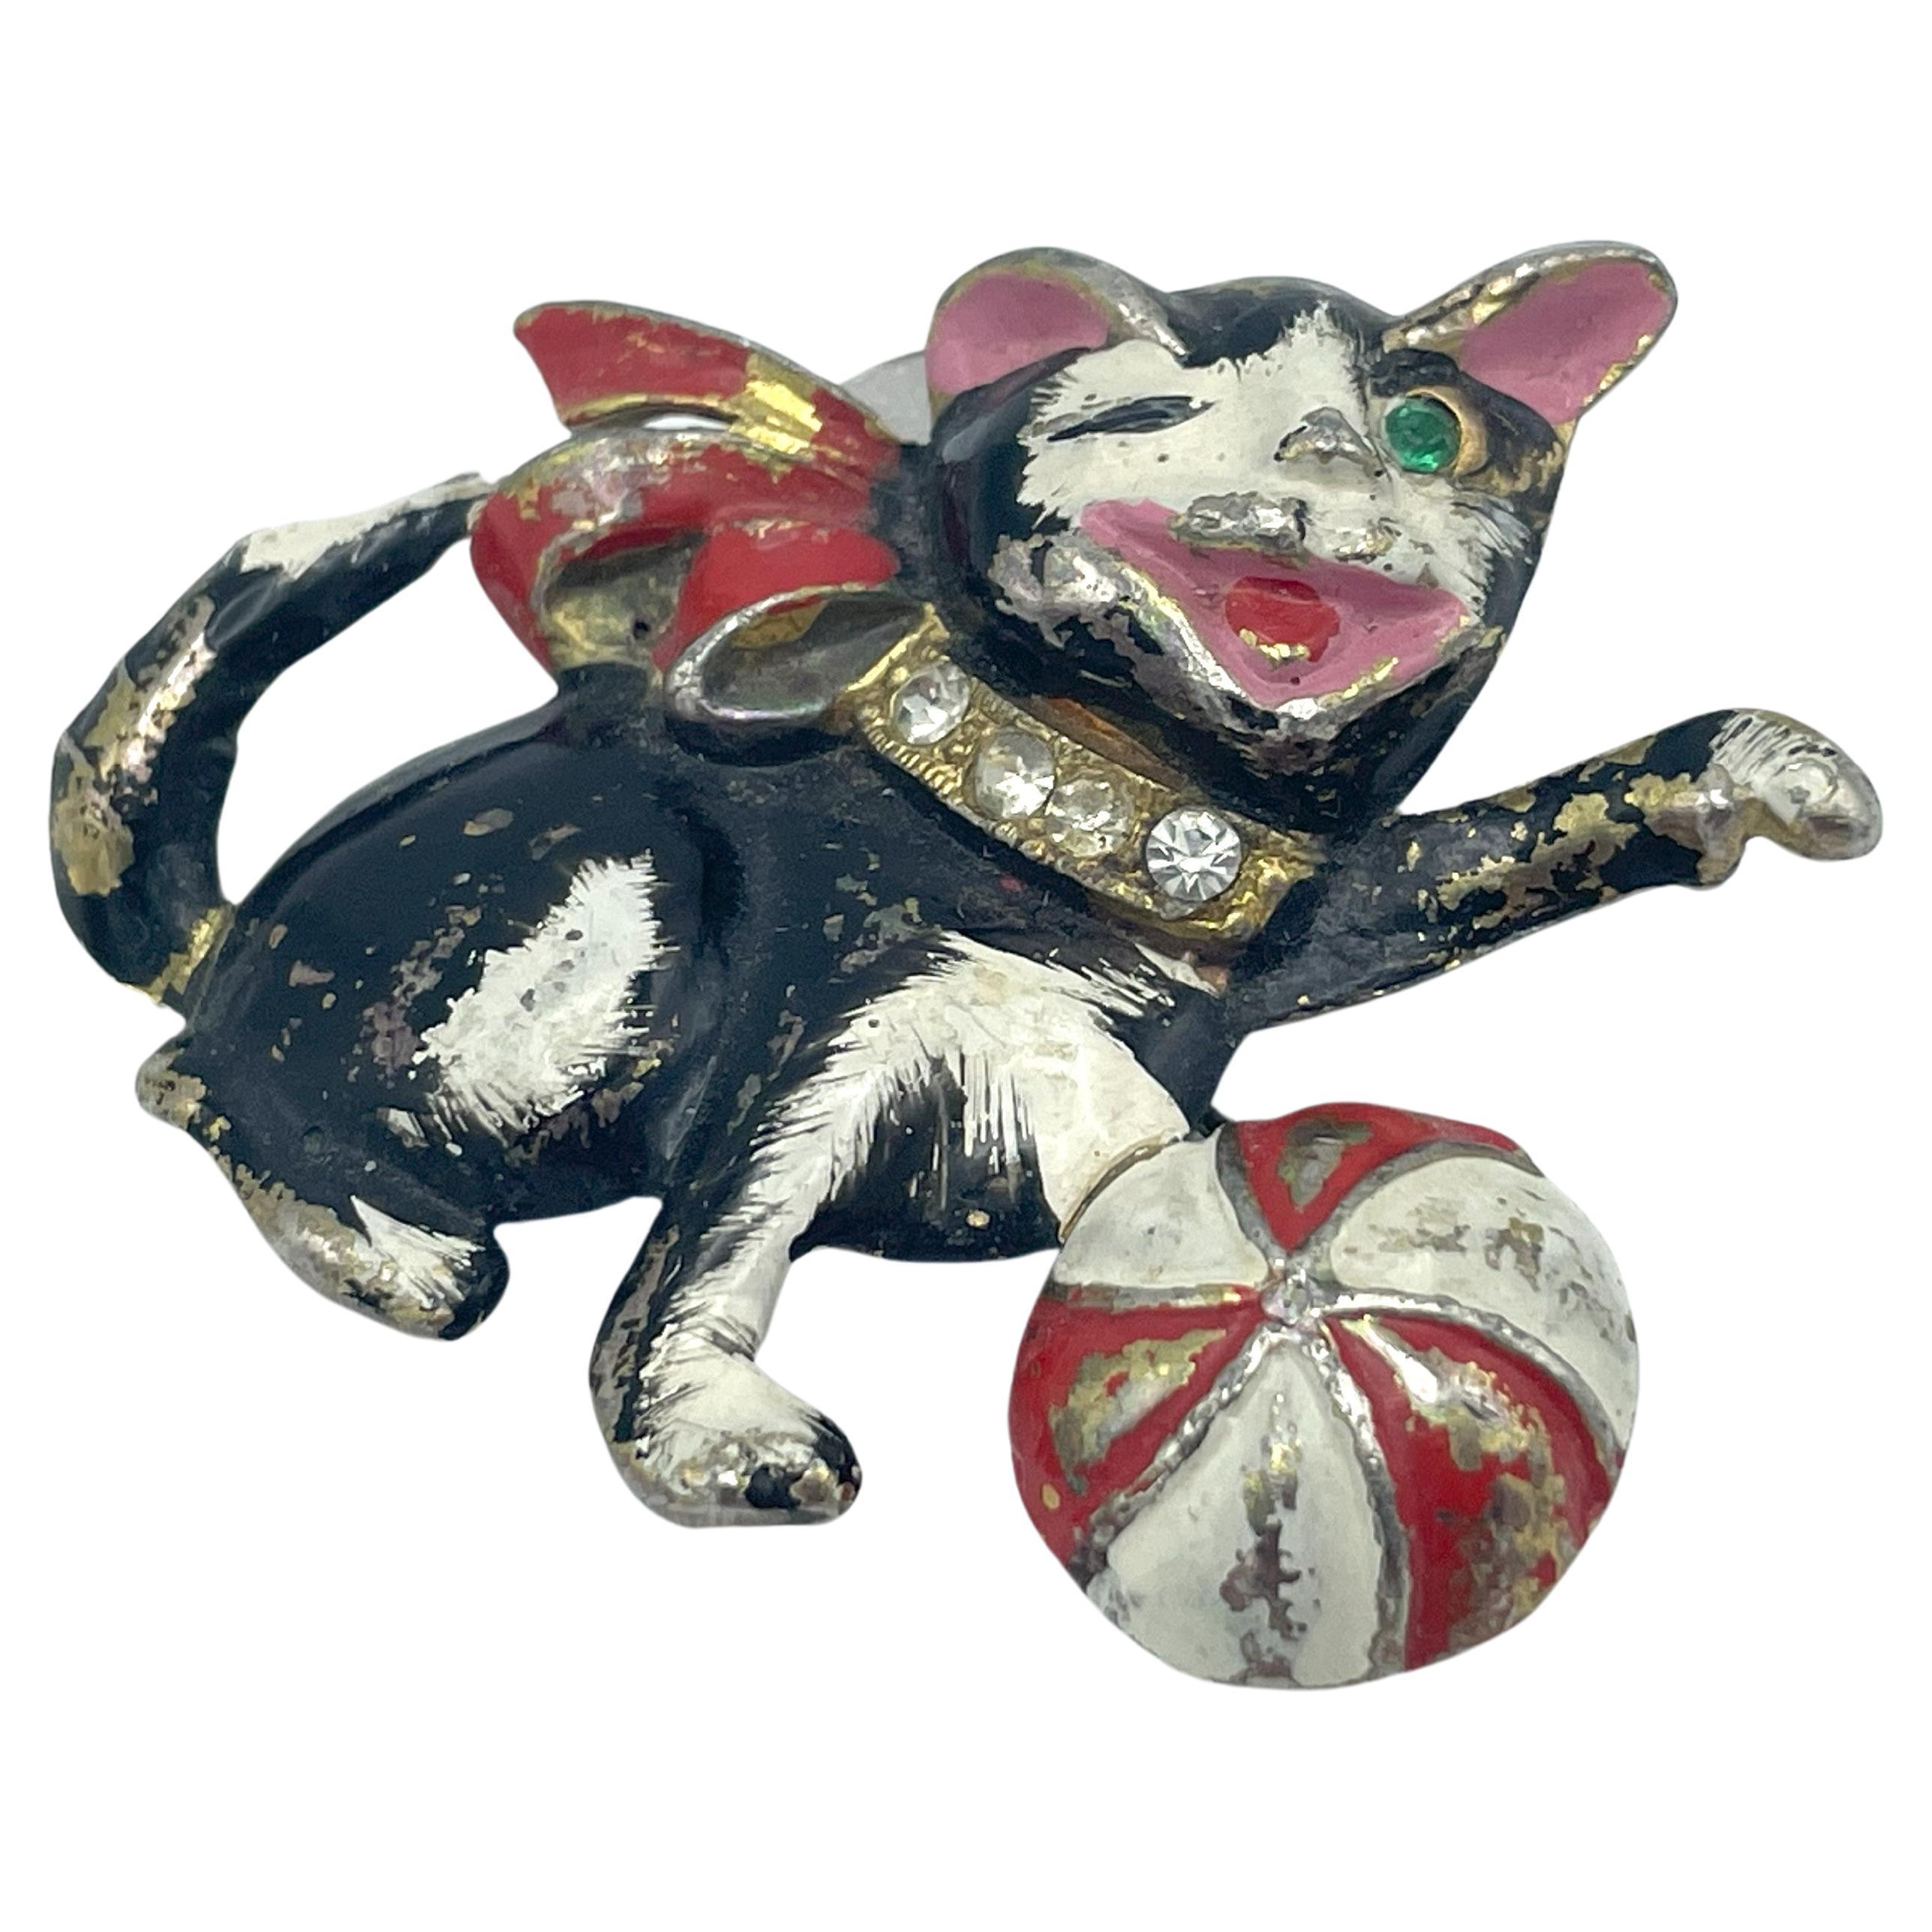  A laughing one and playing cat brooch with rhinestone collar, enameled, 1930/40